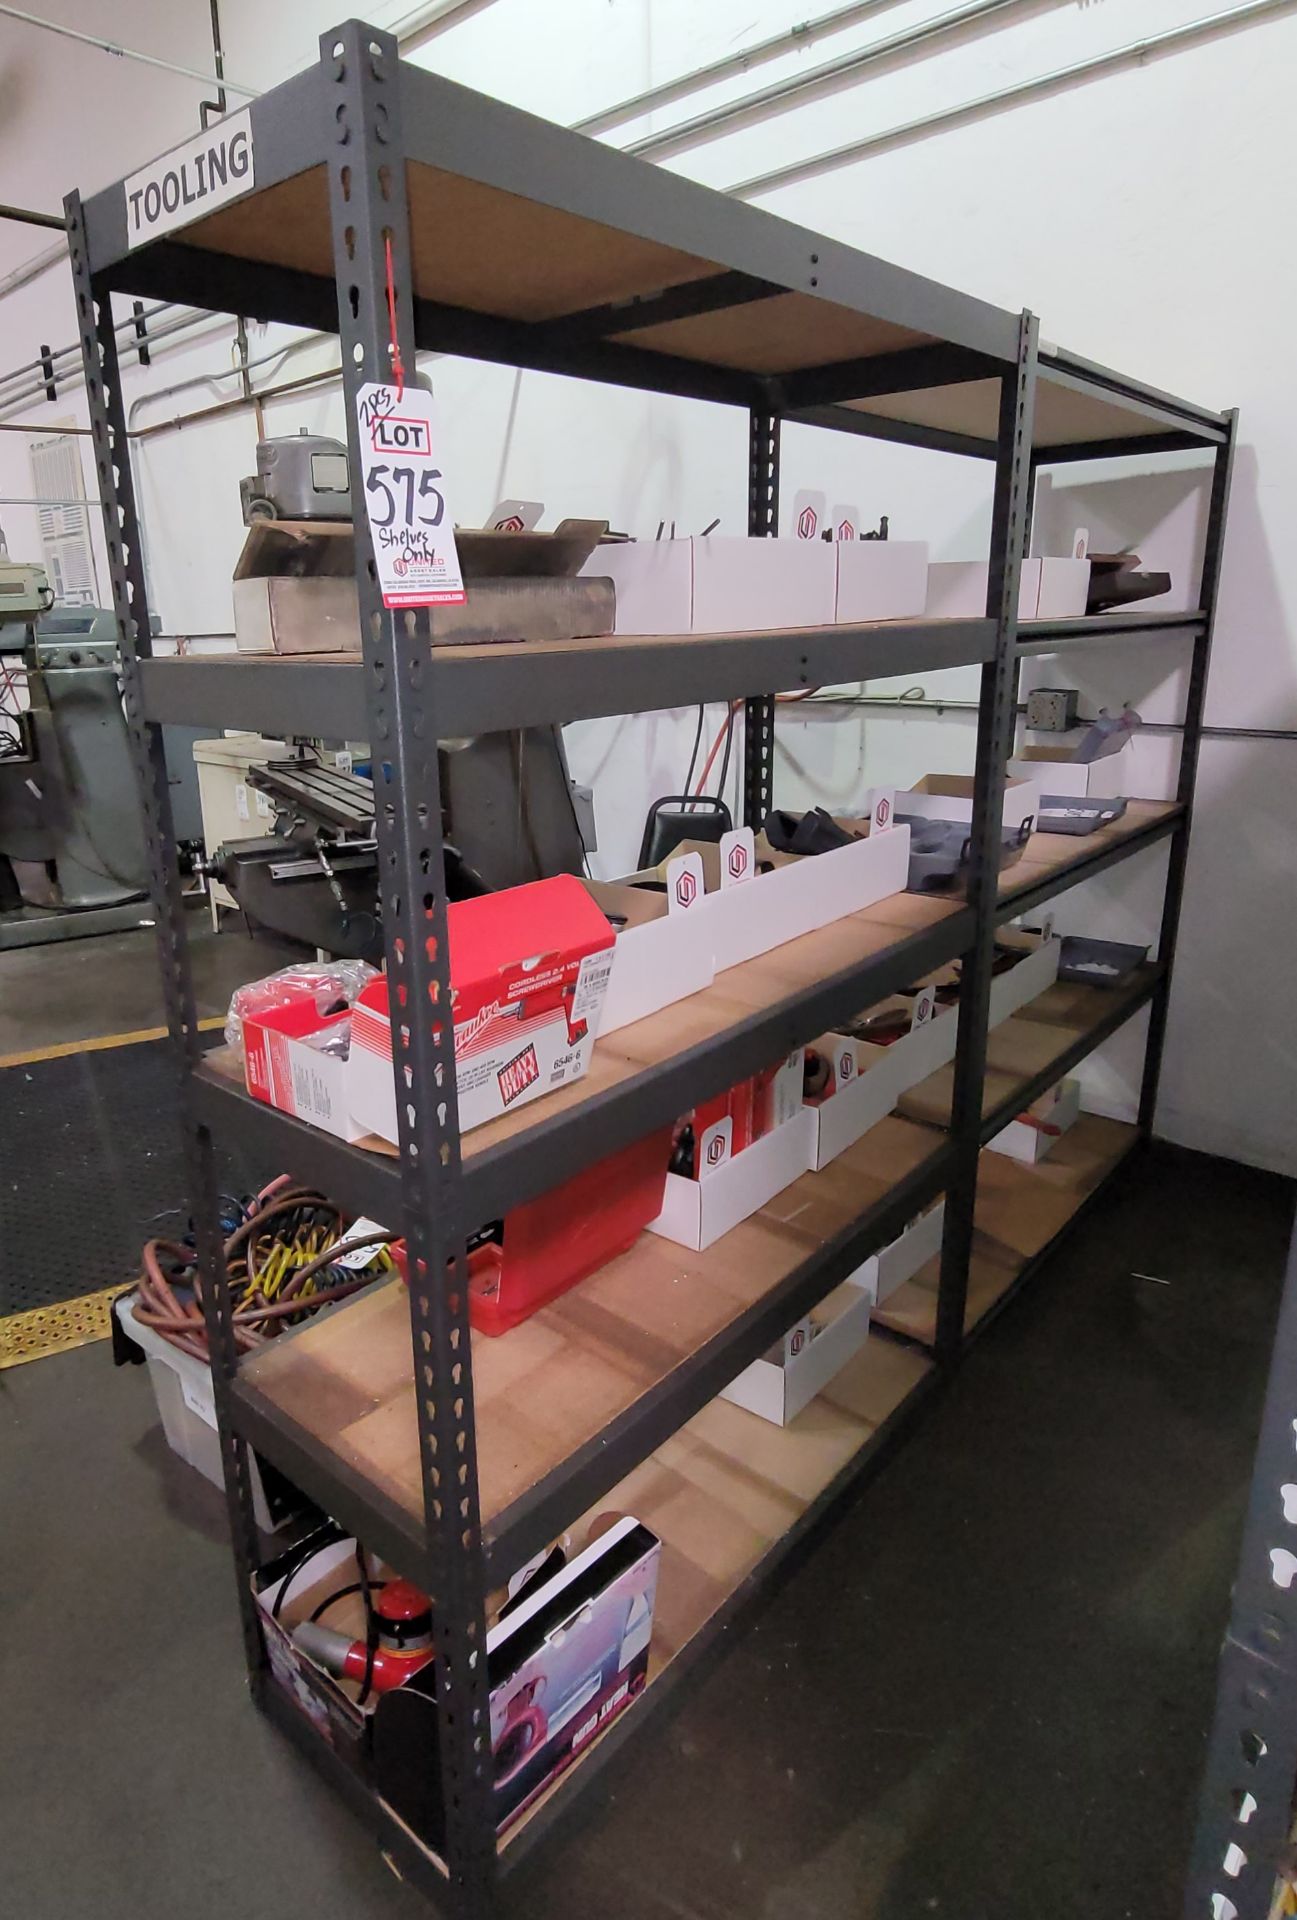 LOT - (2) SHELF UNITS, 4' X 18" X 6' HT, CONTENTS NOT INCLUDED, (DELAYED PICKUP UNTIL JANUARY 20)